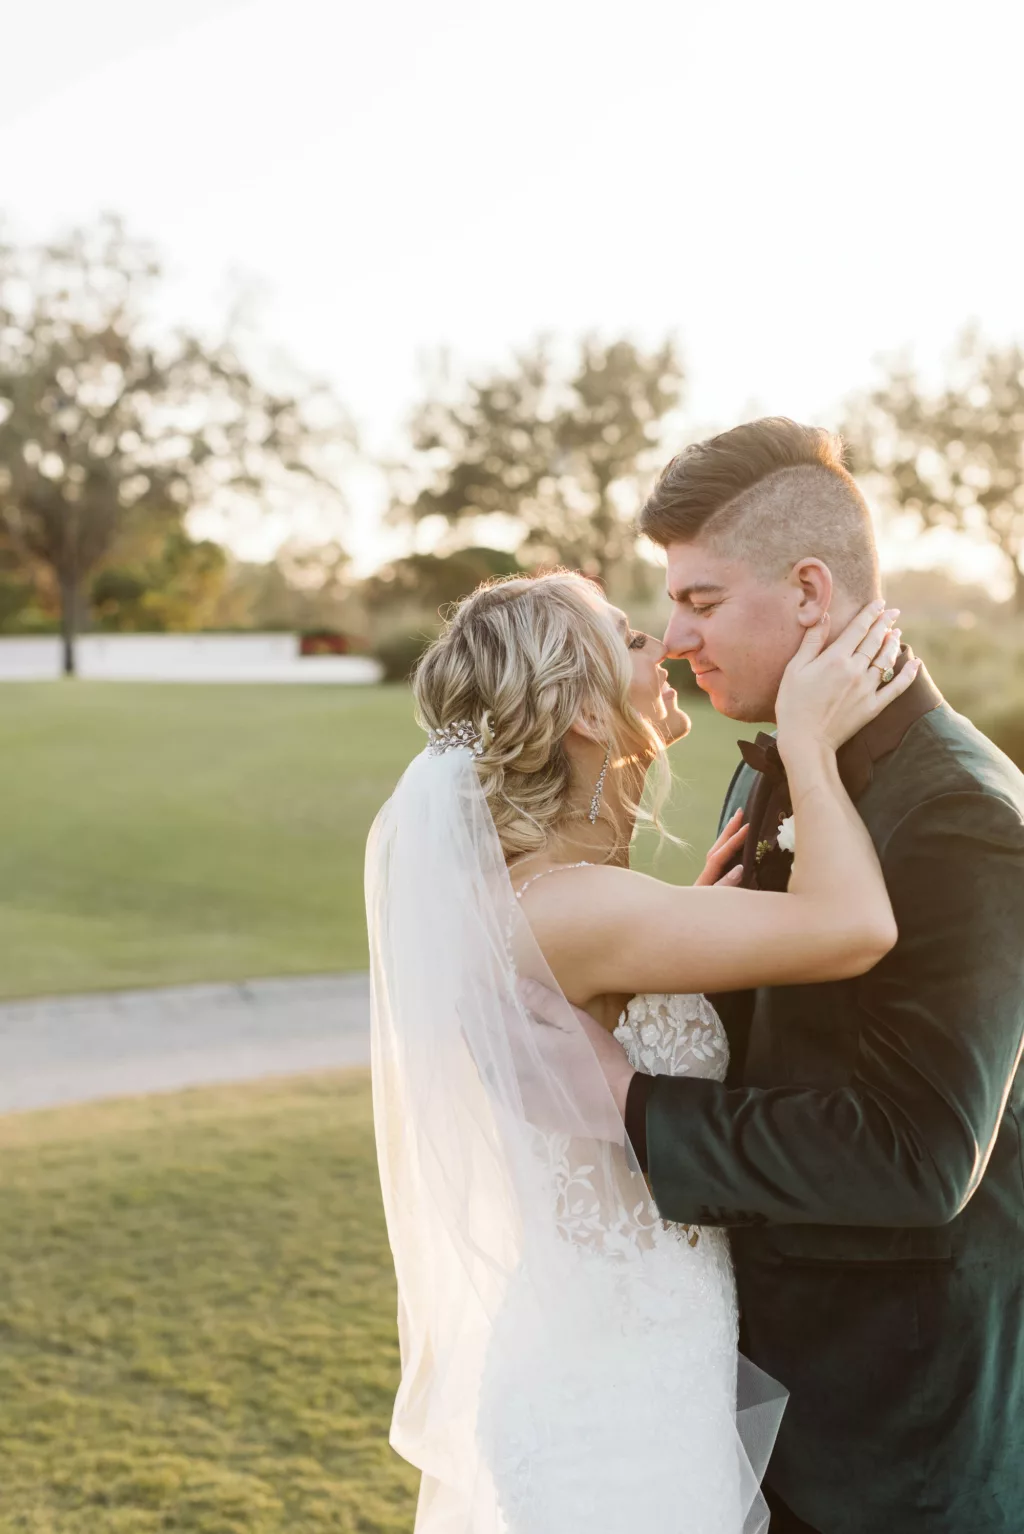 Intimate Bride and Groom Sunset Golf Course Wedding Portrait